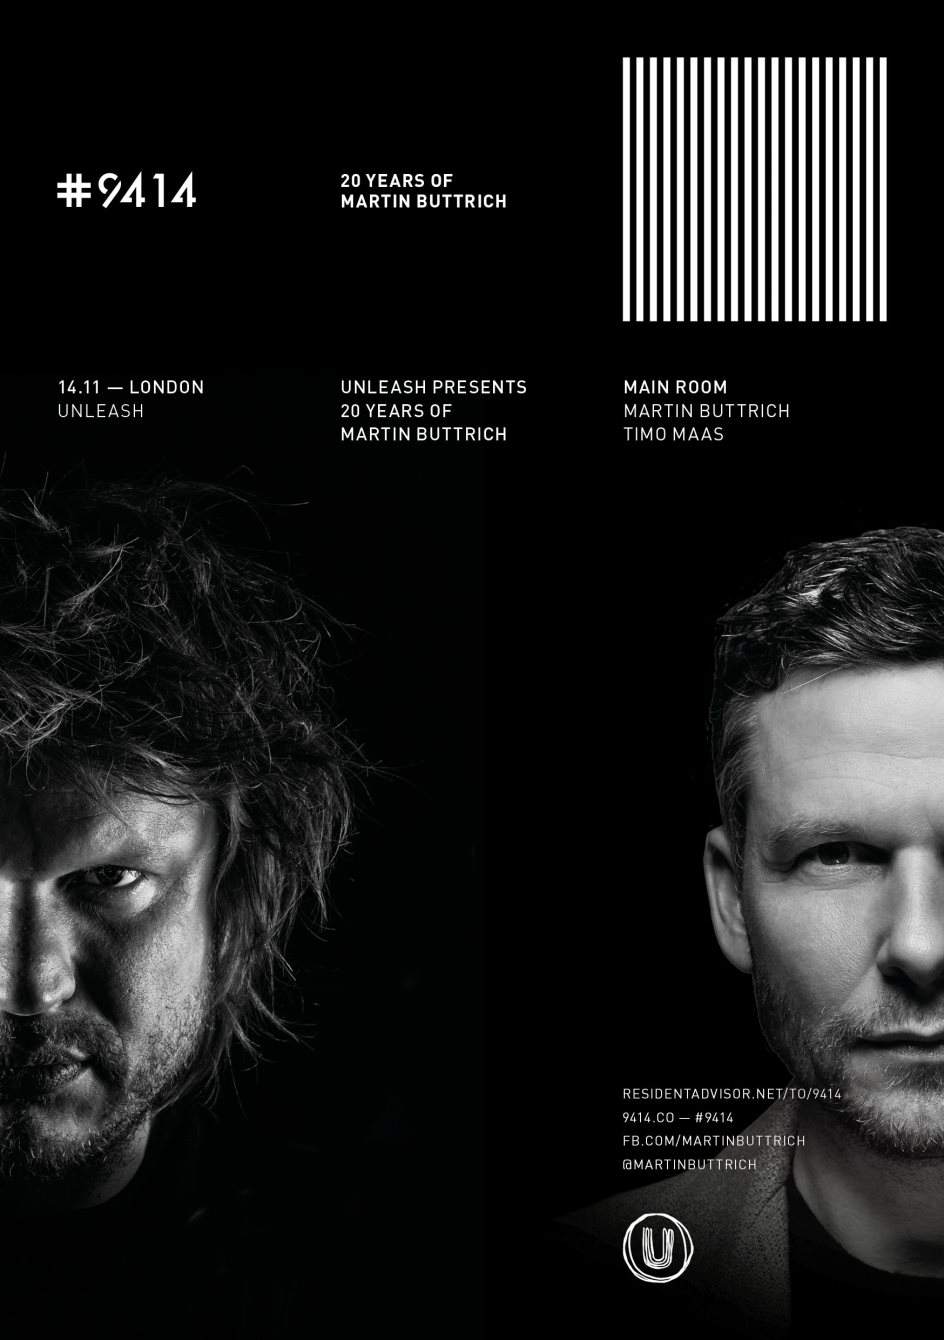 Unleash: #9414, Martin Buttrich 20 Year Tour with Timo Maas - Página frontal